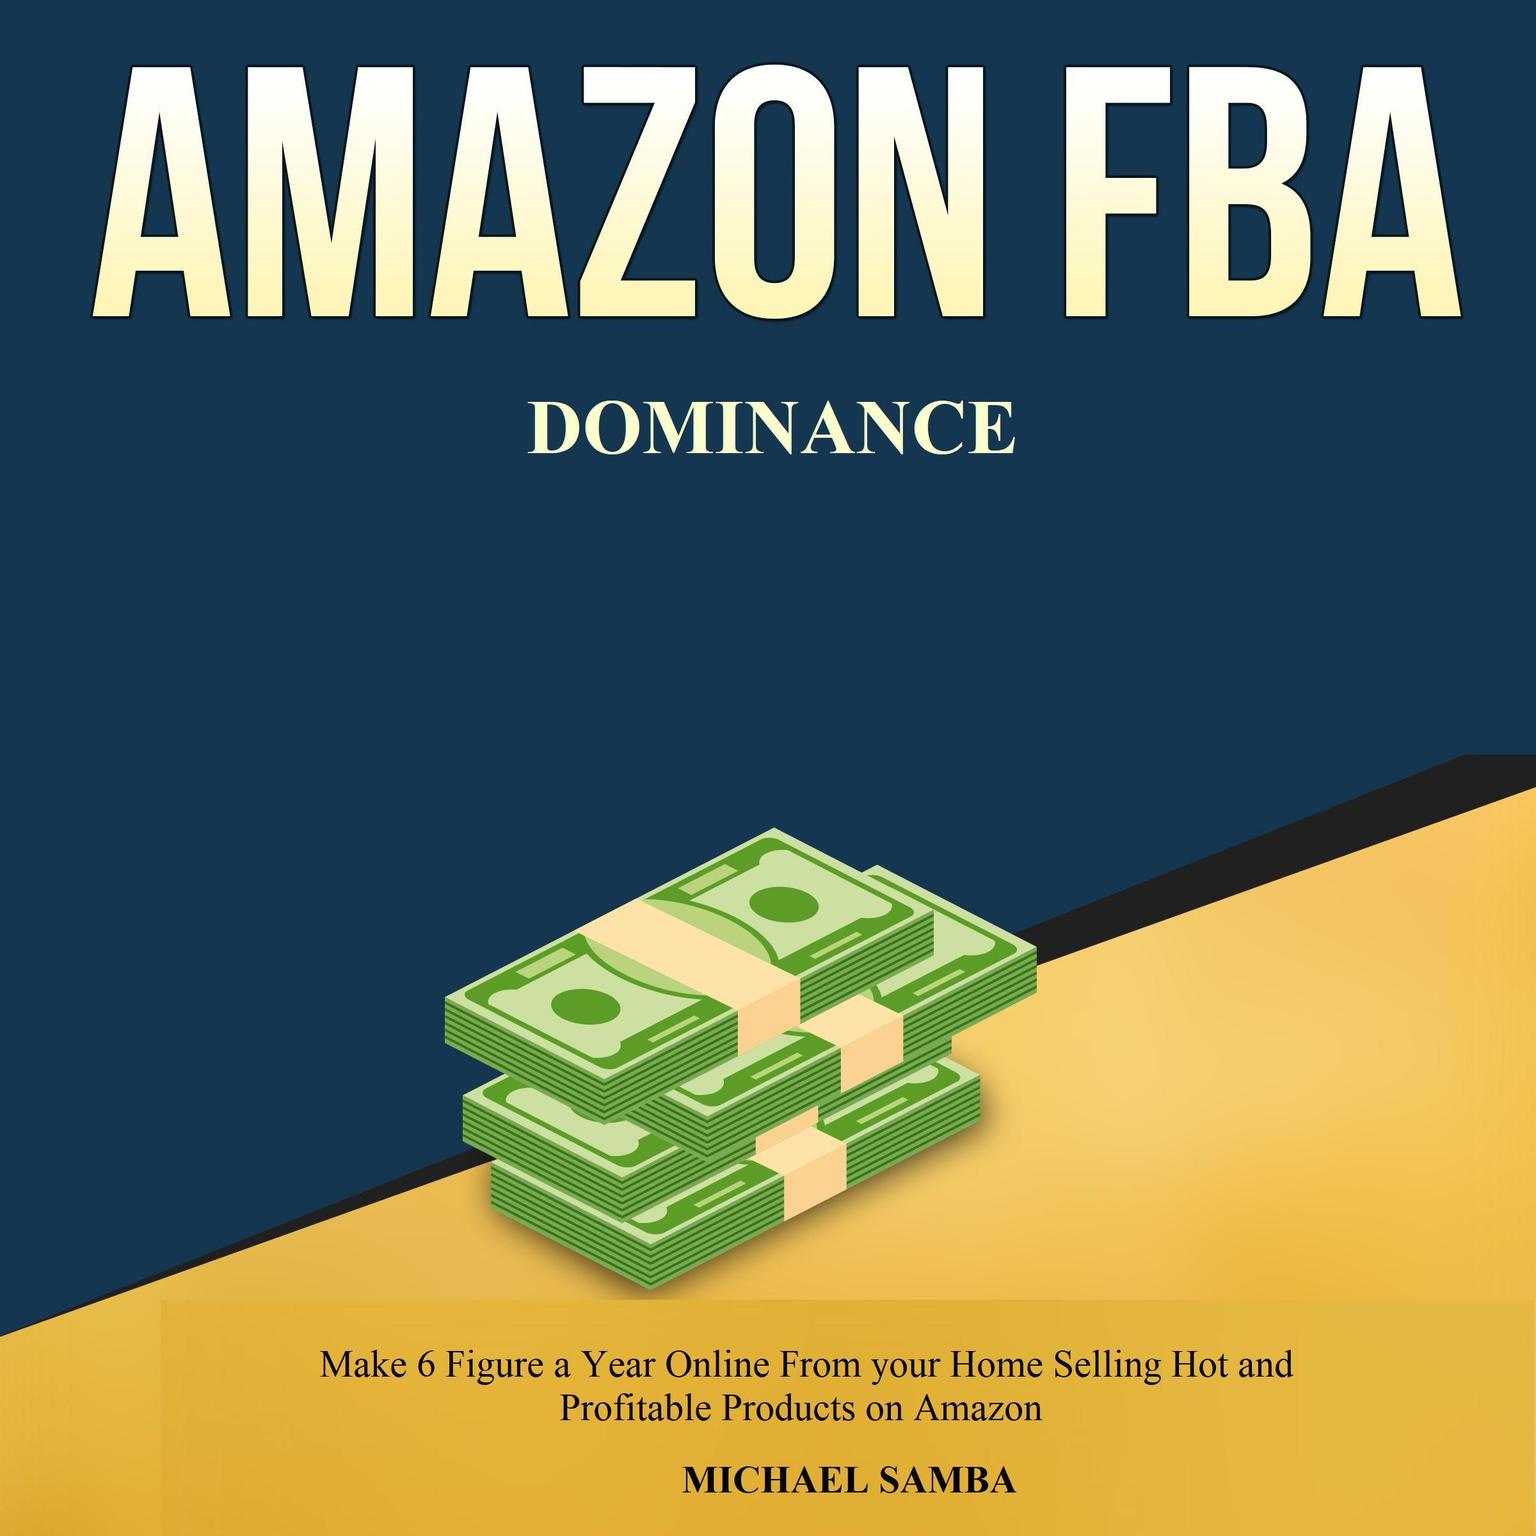 Amazon FBA Dominance:  Make 6 Figure a Year Online From your Home Selling Hot and Profitable Products on Amazon  Audiobook, by Michael Samba